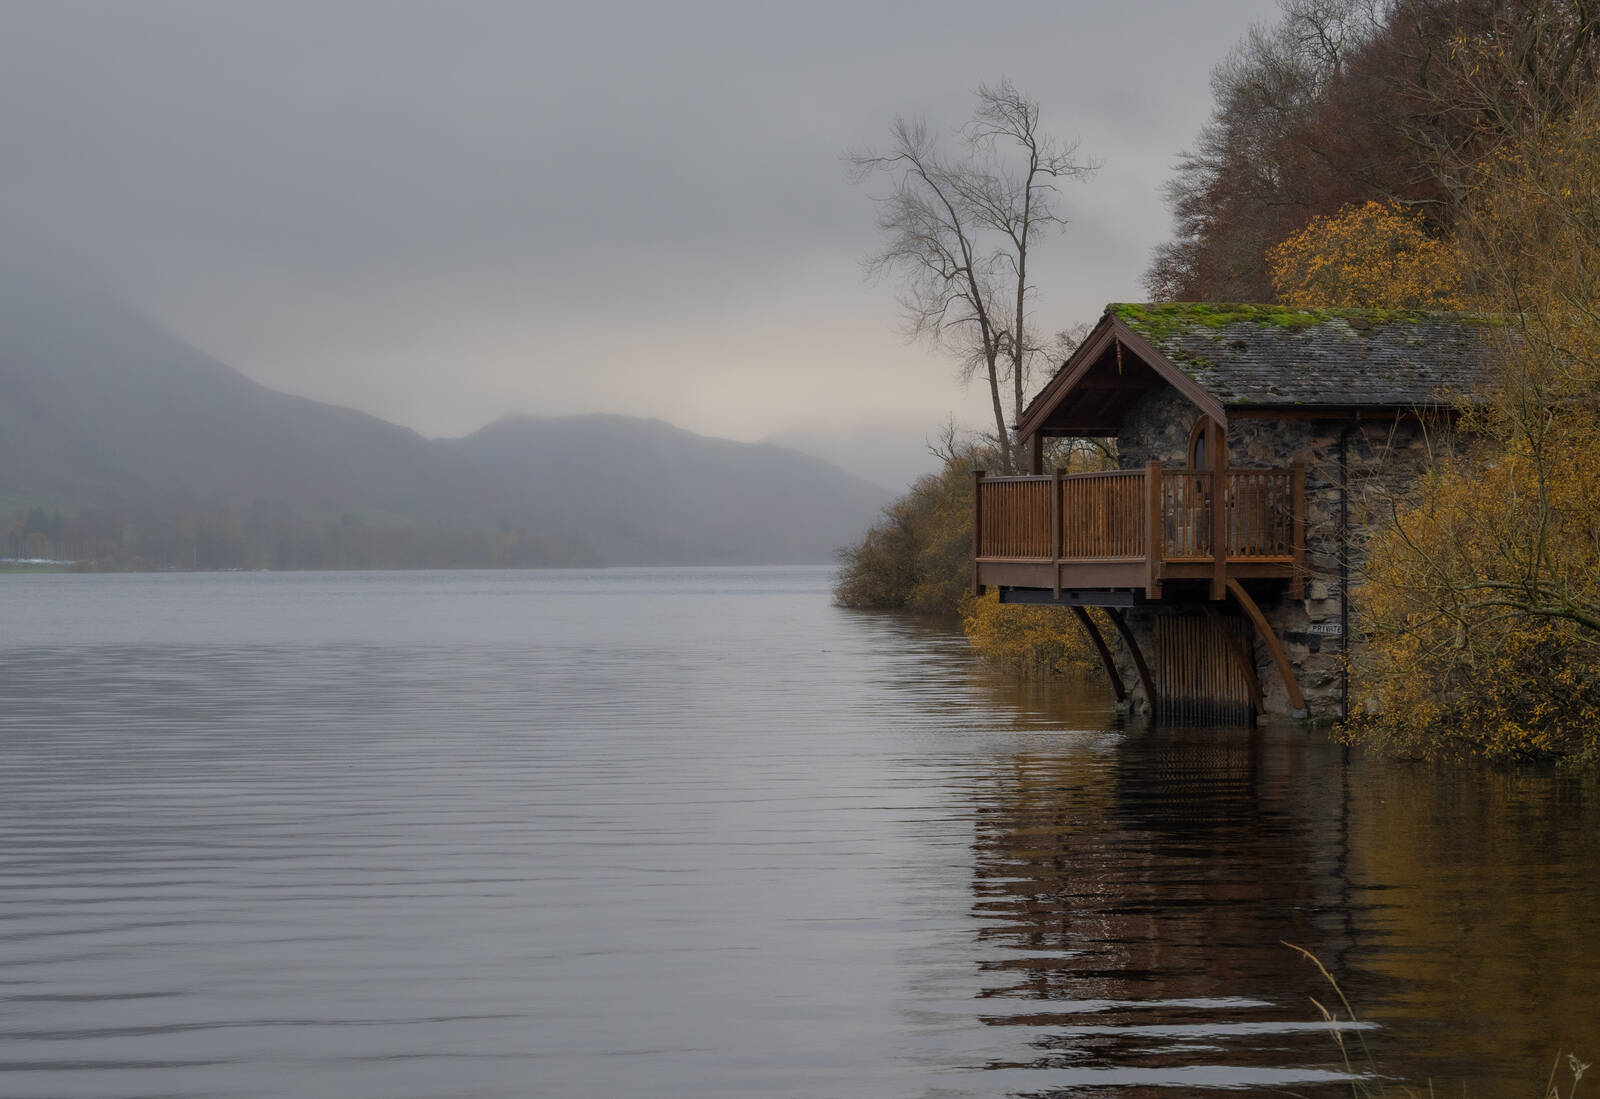 Image of Duke of Portland Boathouse, Ullswater, Lake District by Paul Gaskell